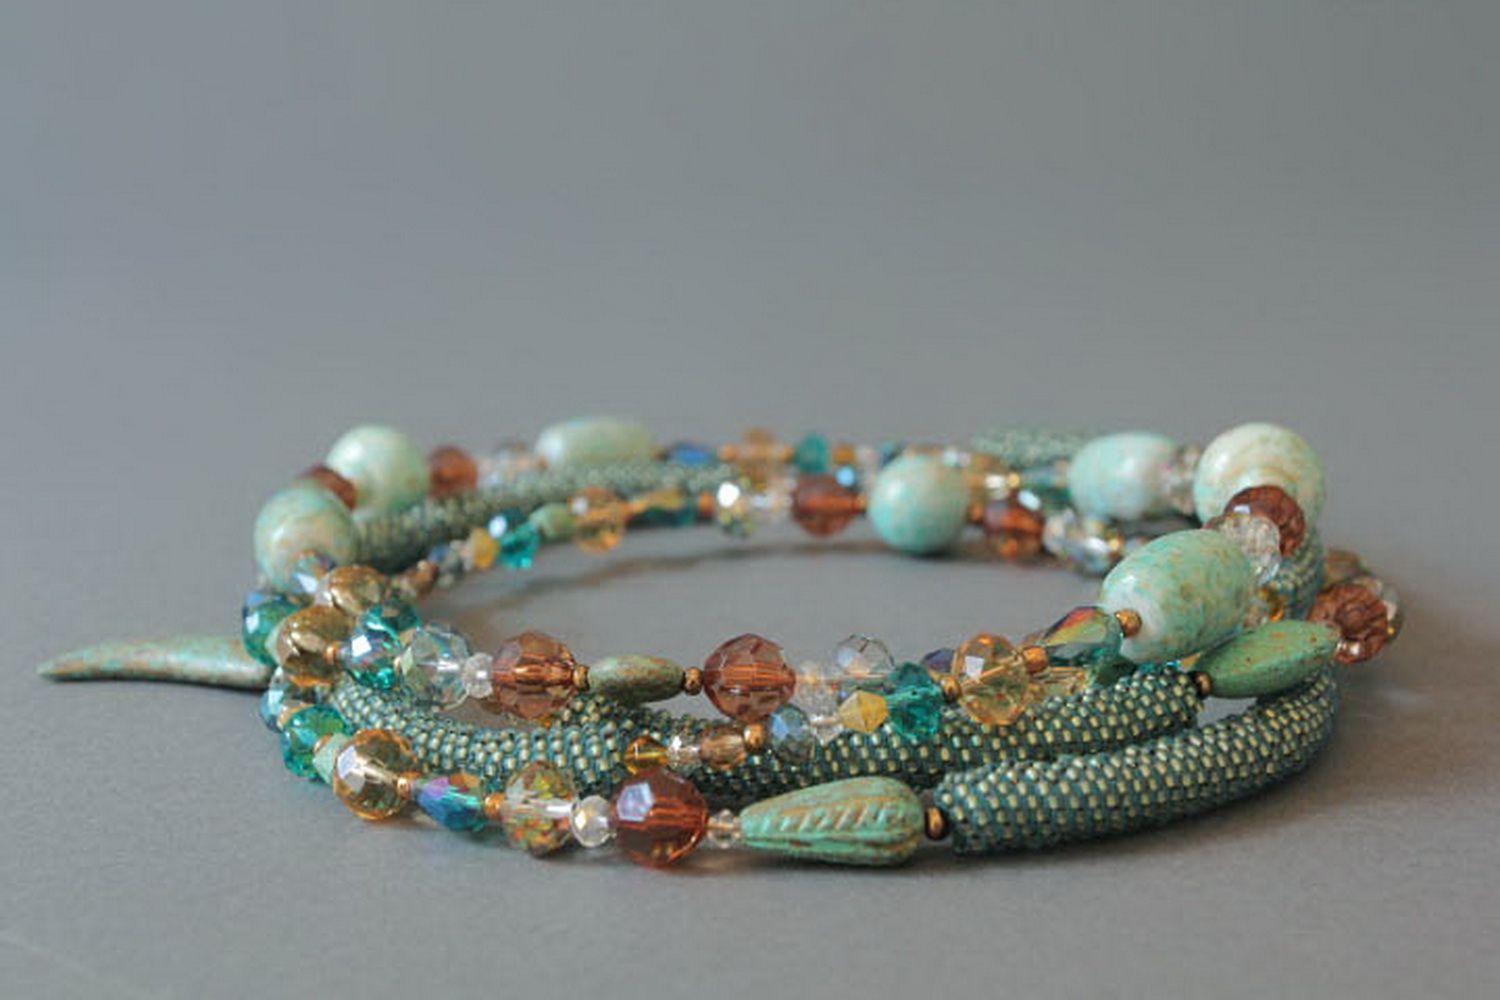 Plaited necklace made from beads with decorative stones photo 1